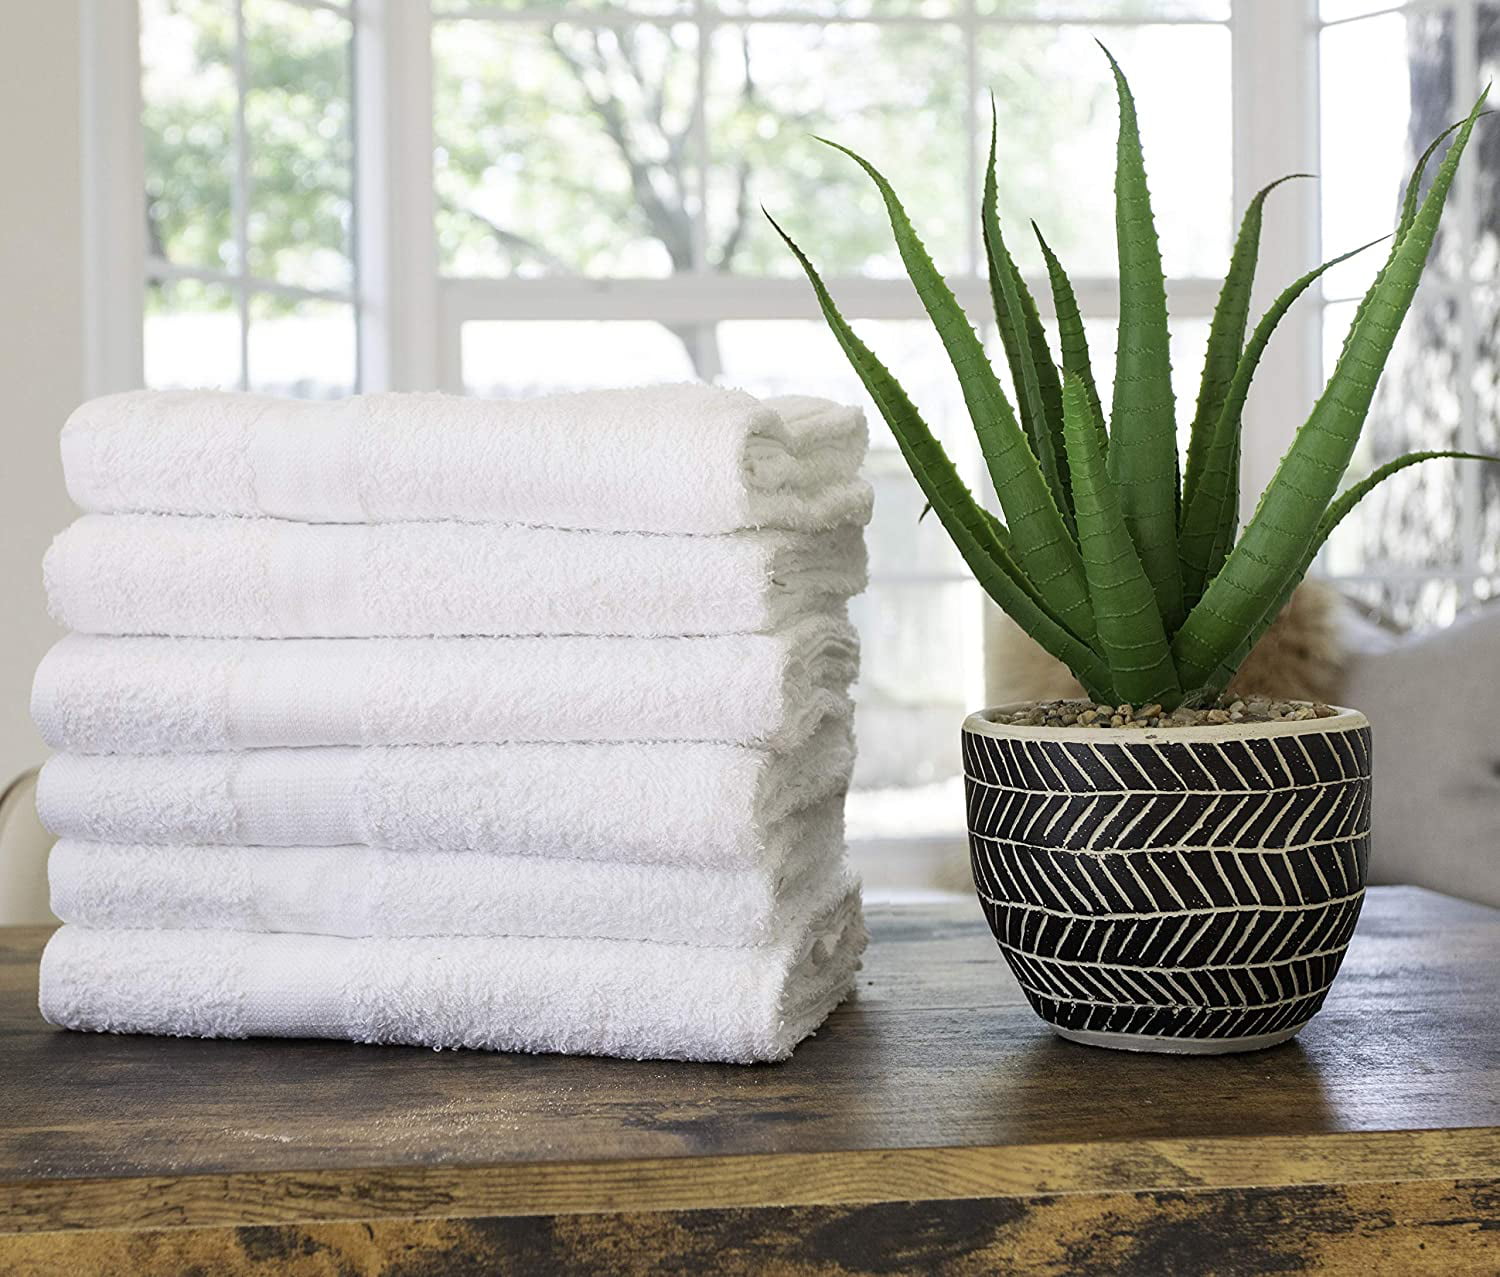 Bath Towels Set, 22 x 44 inch 100% Cotton - Lightweight Thin Commercial, Bulk  Towels, Pool, Spa, Gym, Home 12 White 